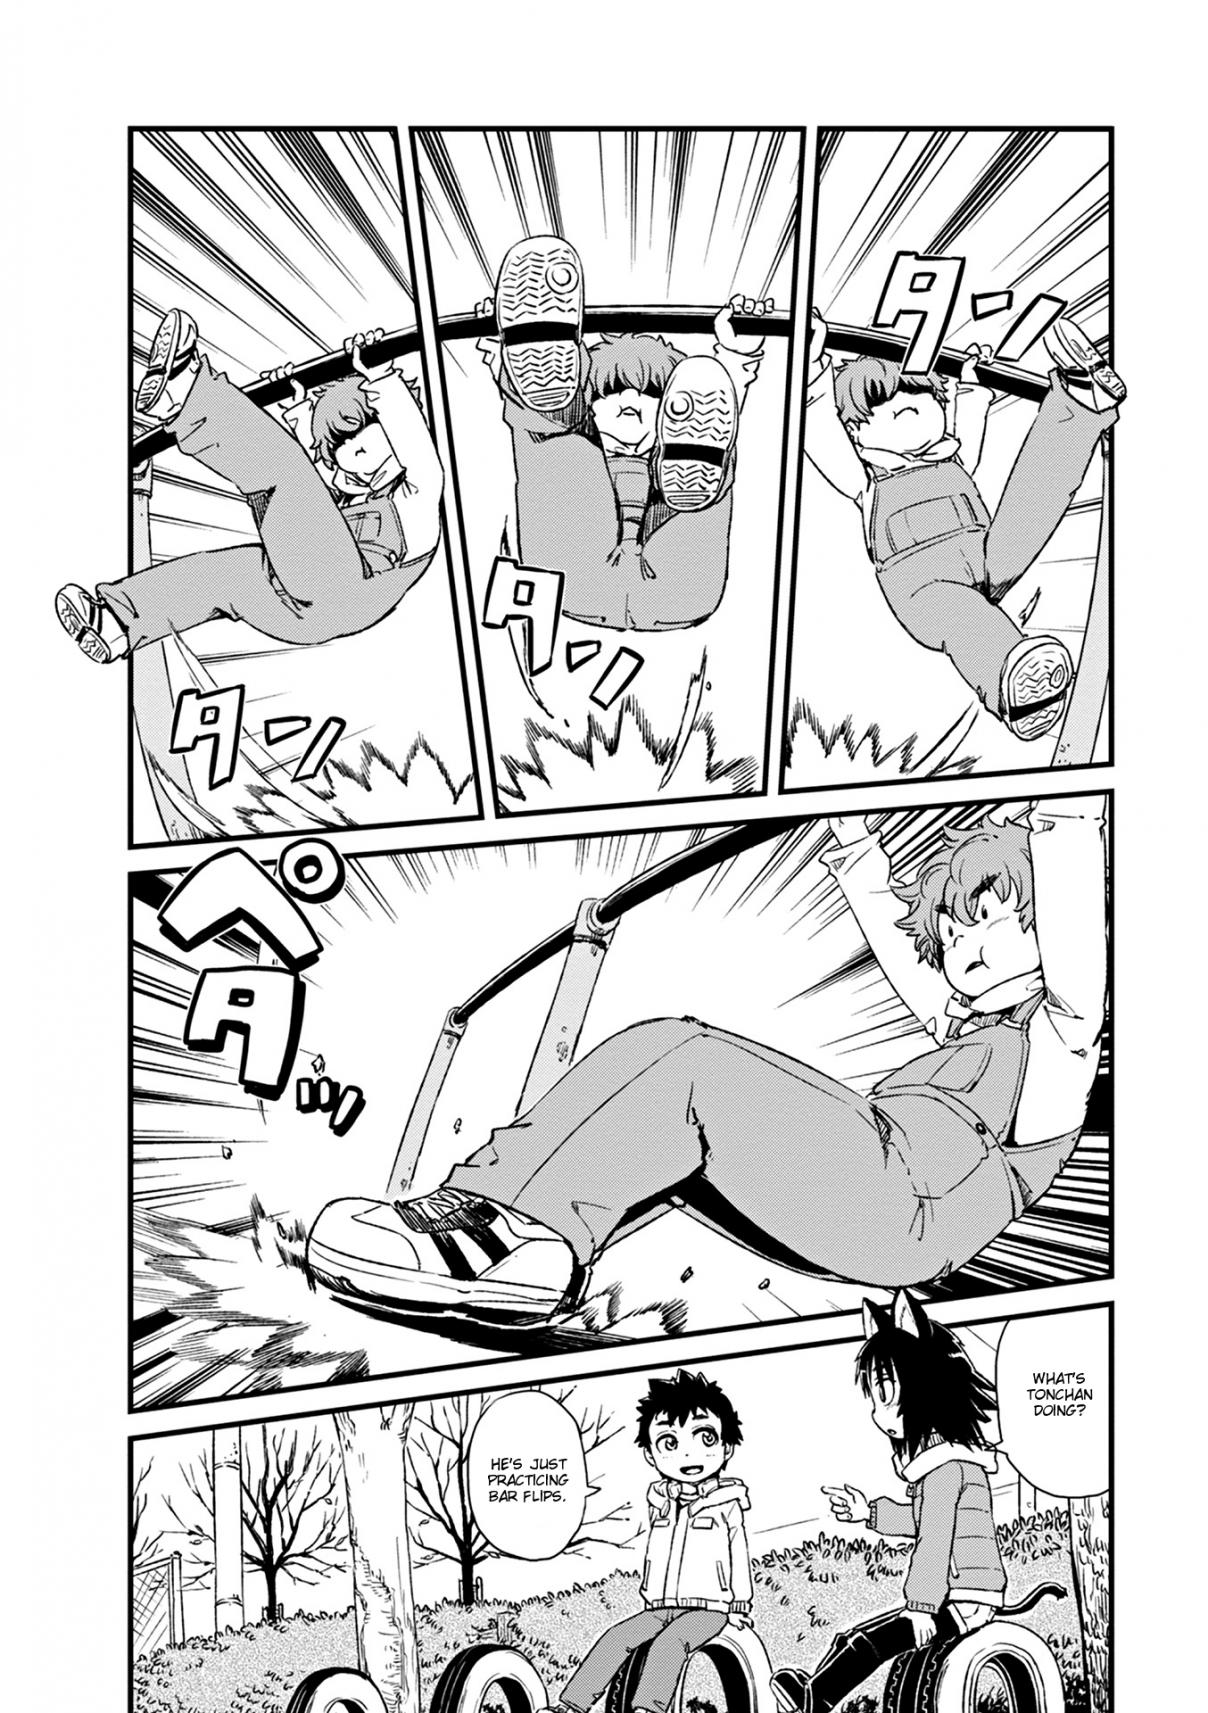 Neko Musume Michikusa Nikki Vol. 13 Ch. 75 Passing the Time Doing Bar Flips and Helping Out